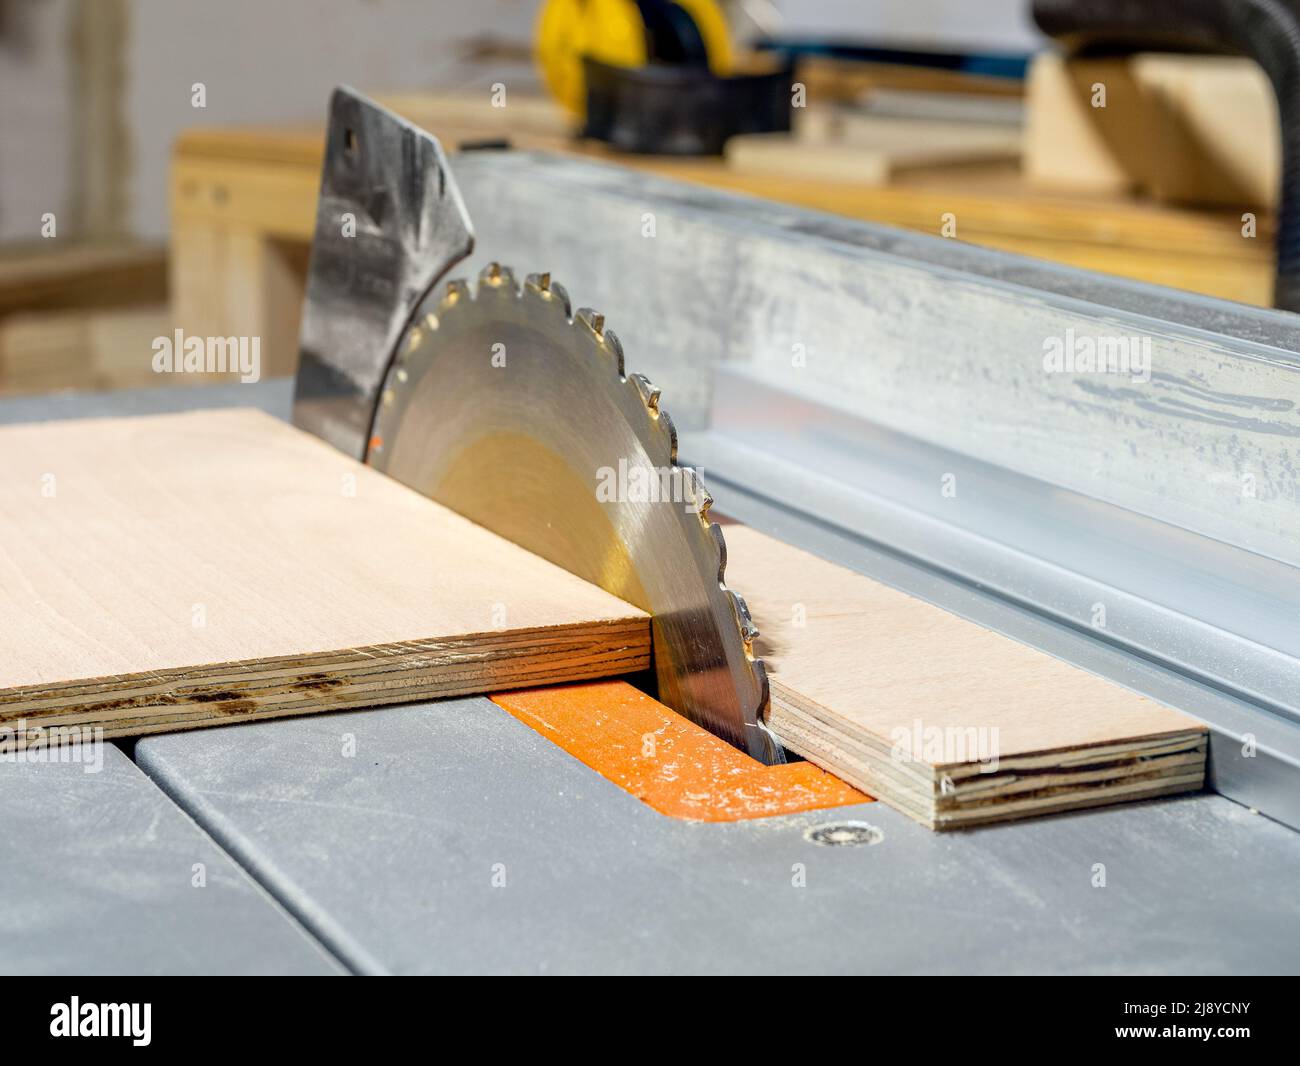 Close up of table saw circular blade cutting through a birch plywood sheet  selective focus on saw blade Stock Photo